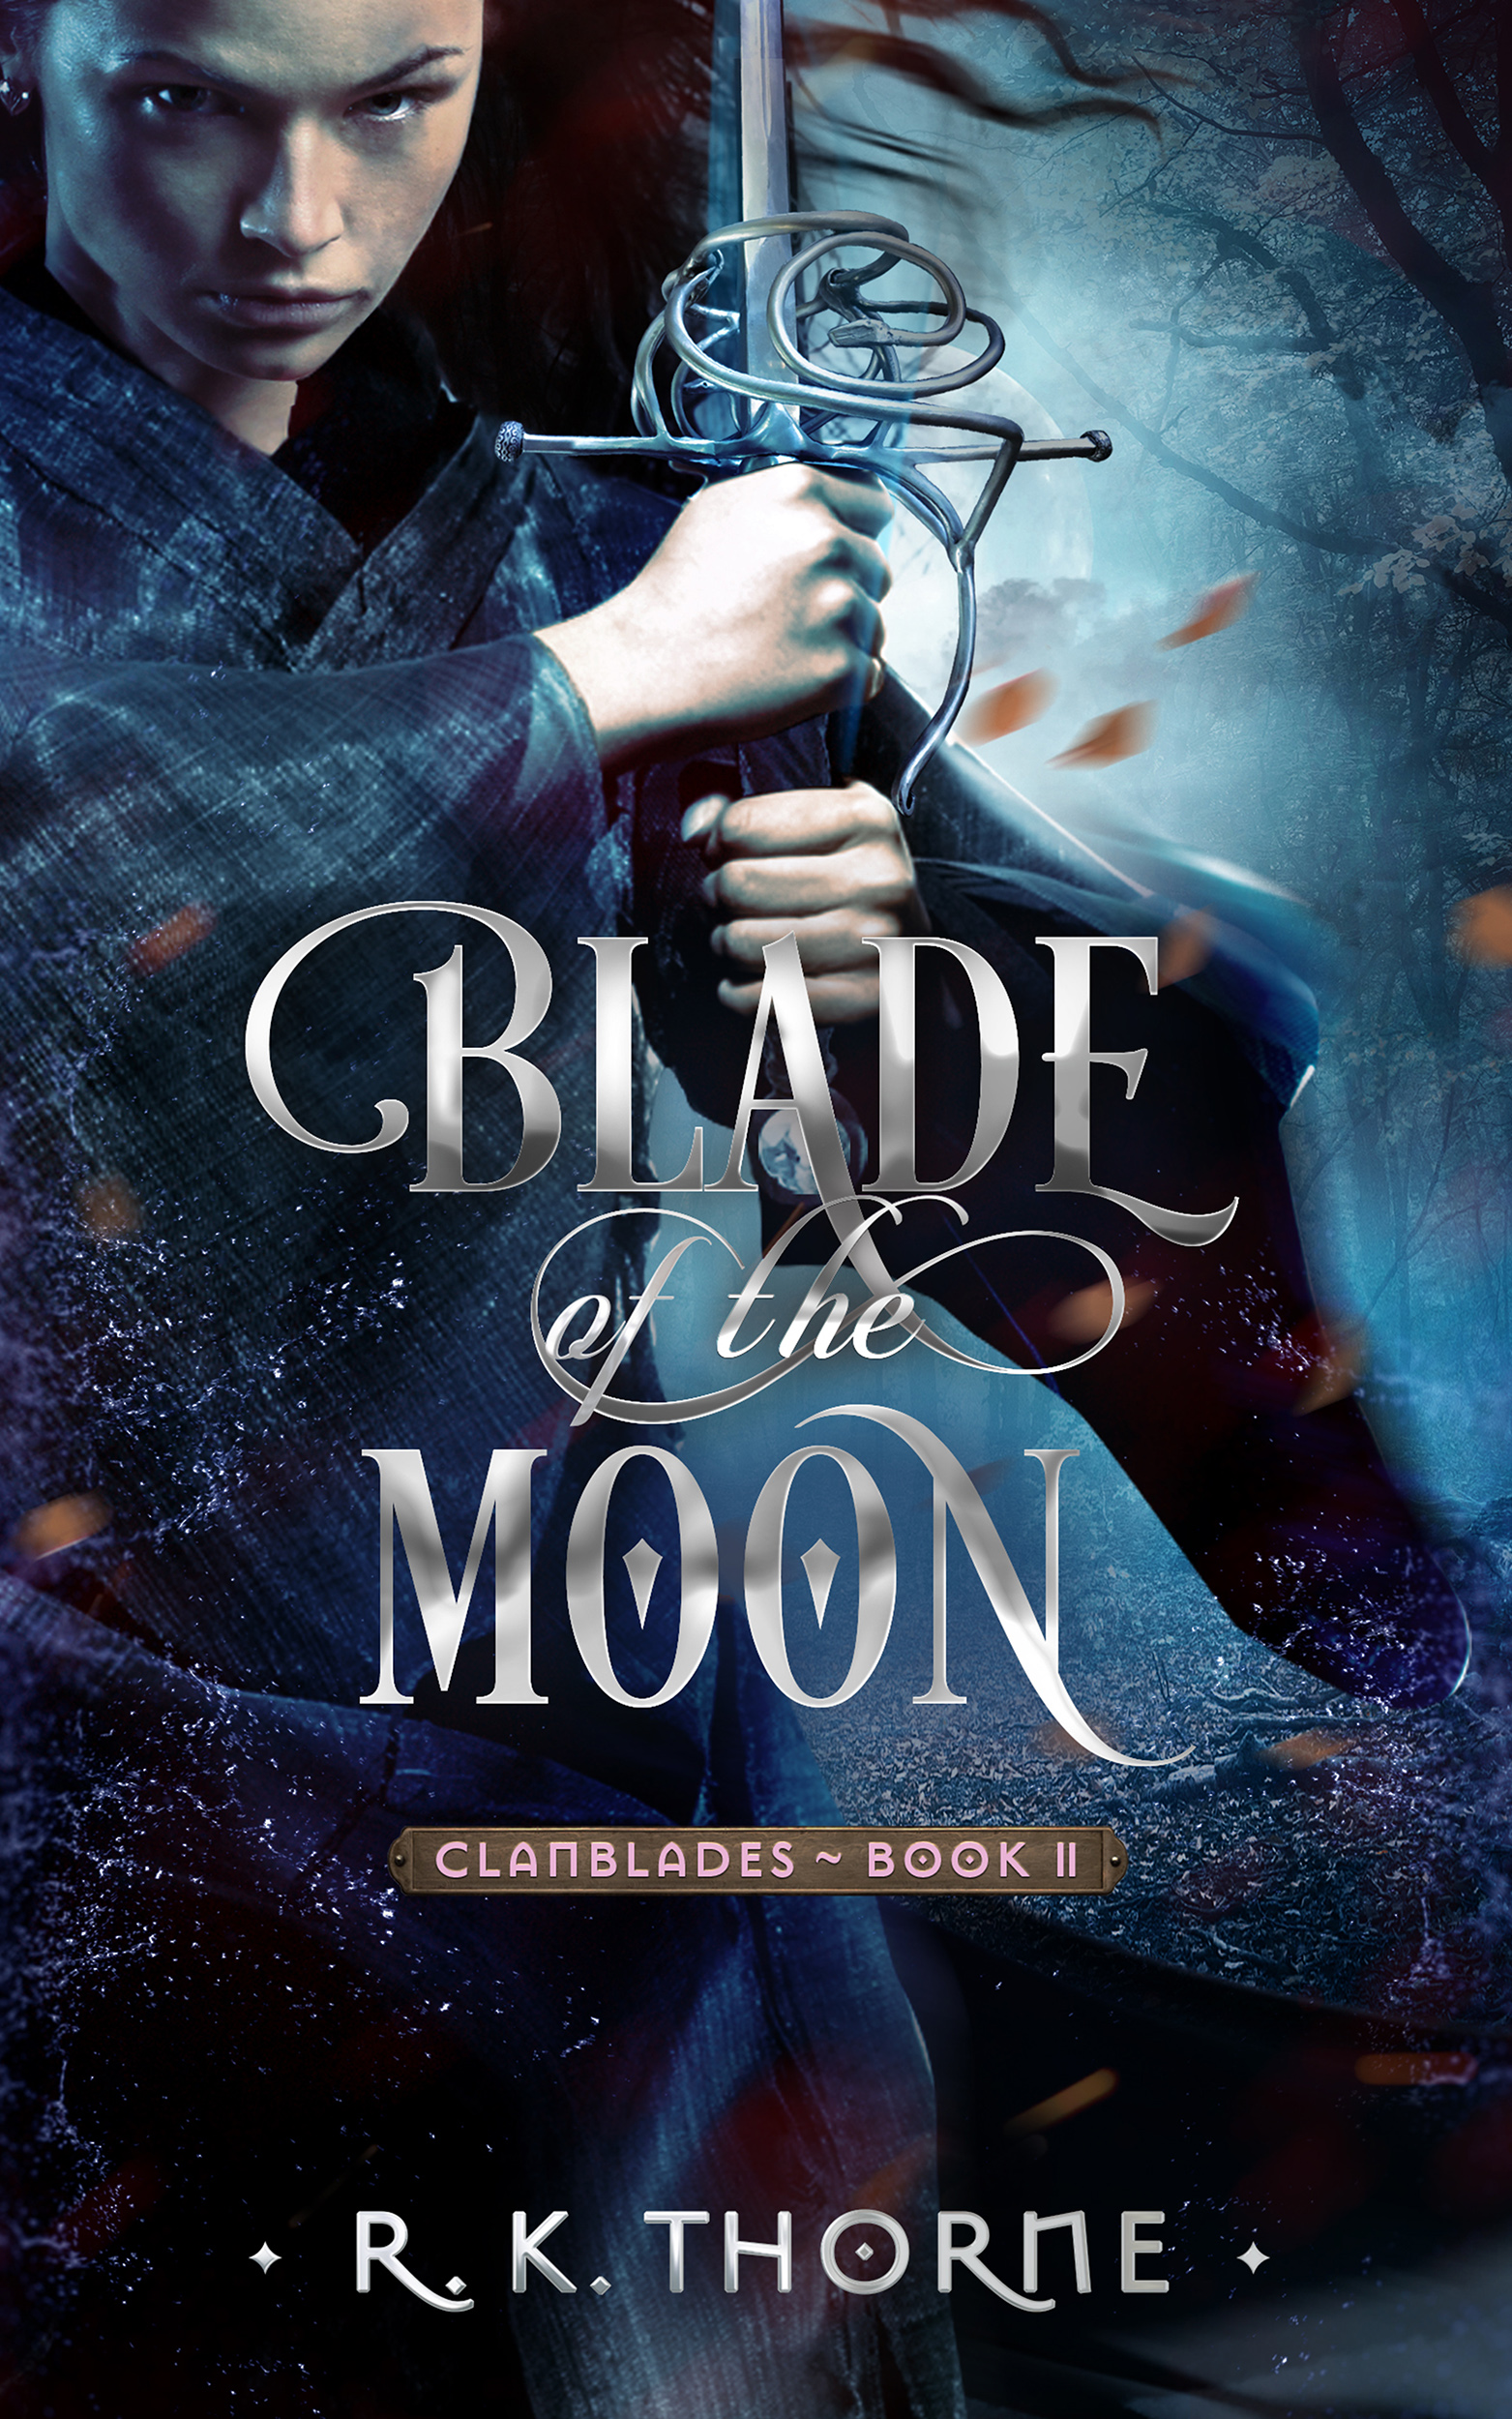 Cover for the book BLADE OF THE MOON depicting a woman holding a sword in the woods at night, with the title.